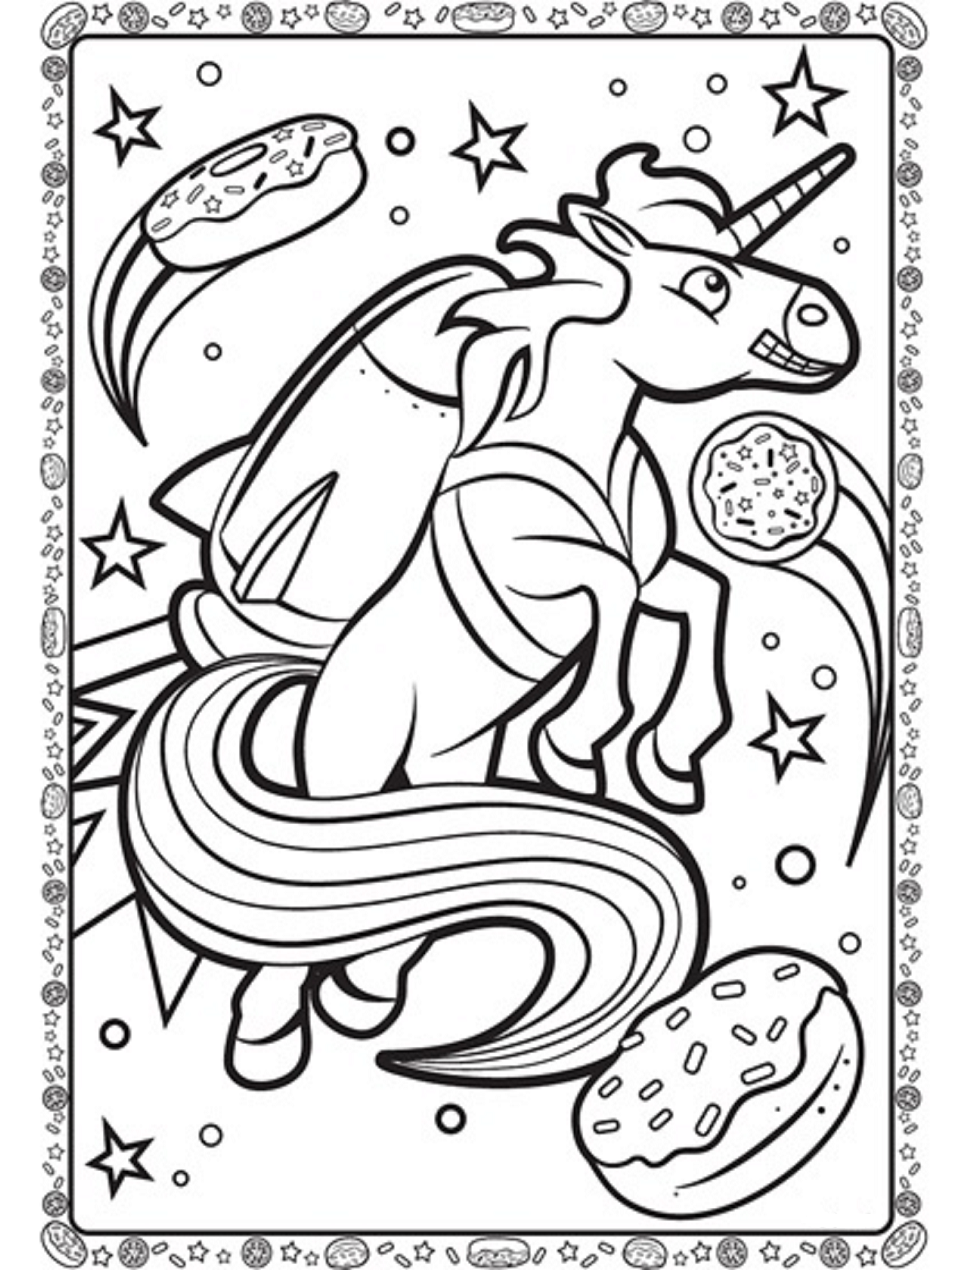 Evil Unicorn Coloring Page   Free Printable Coloring Pages for Kids